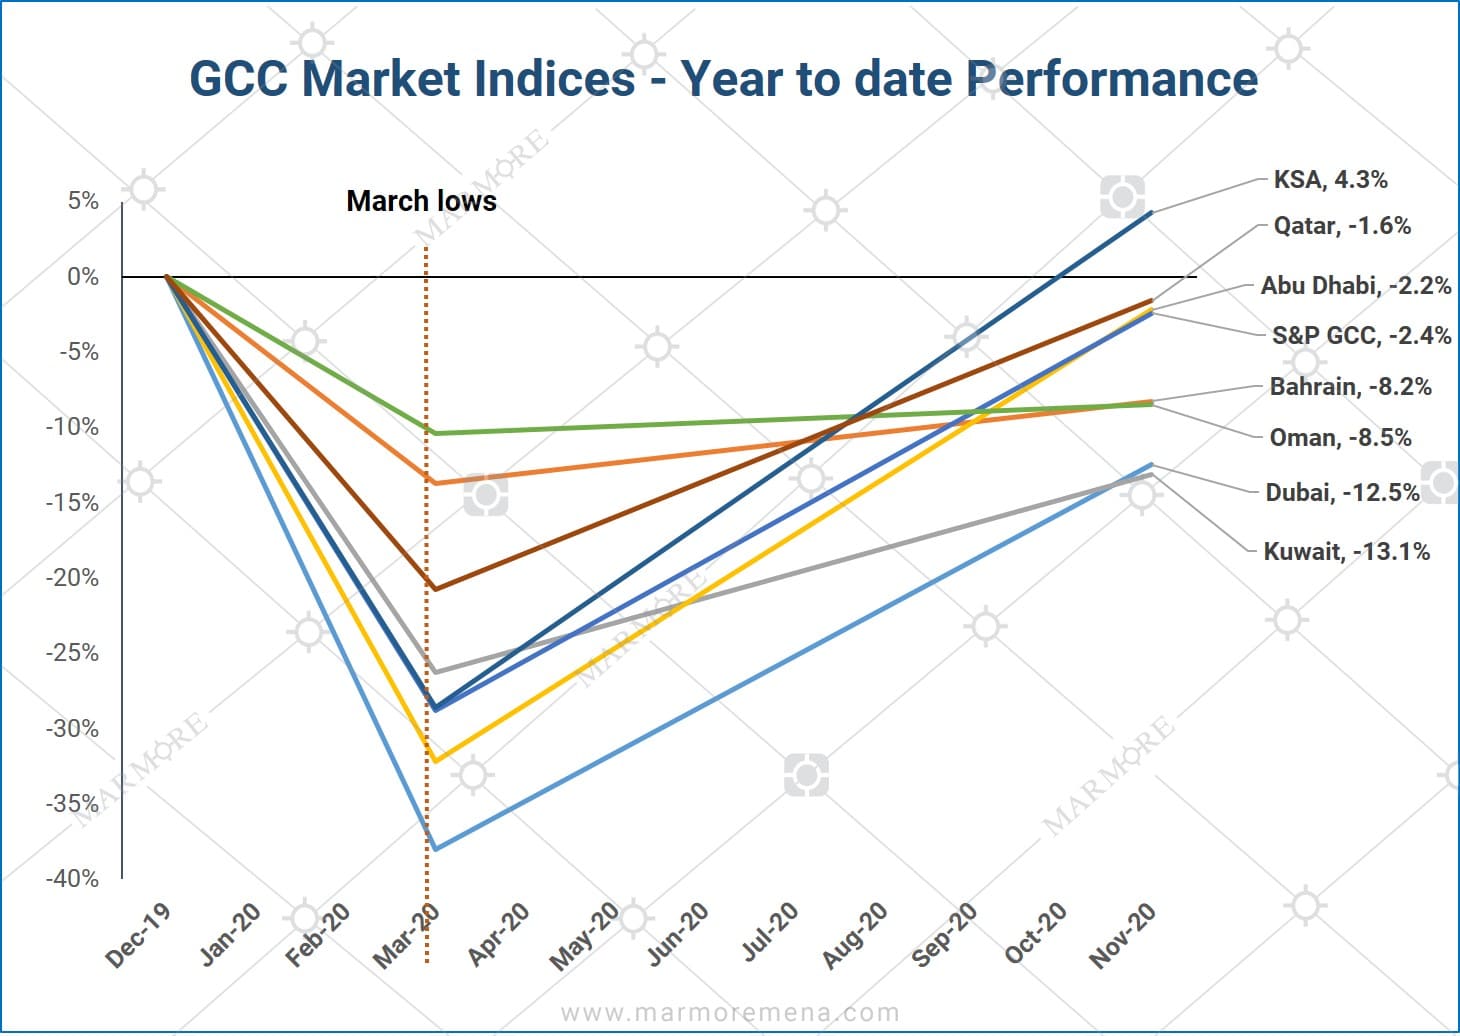 GCC Markets - Year to Date Performance